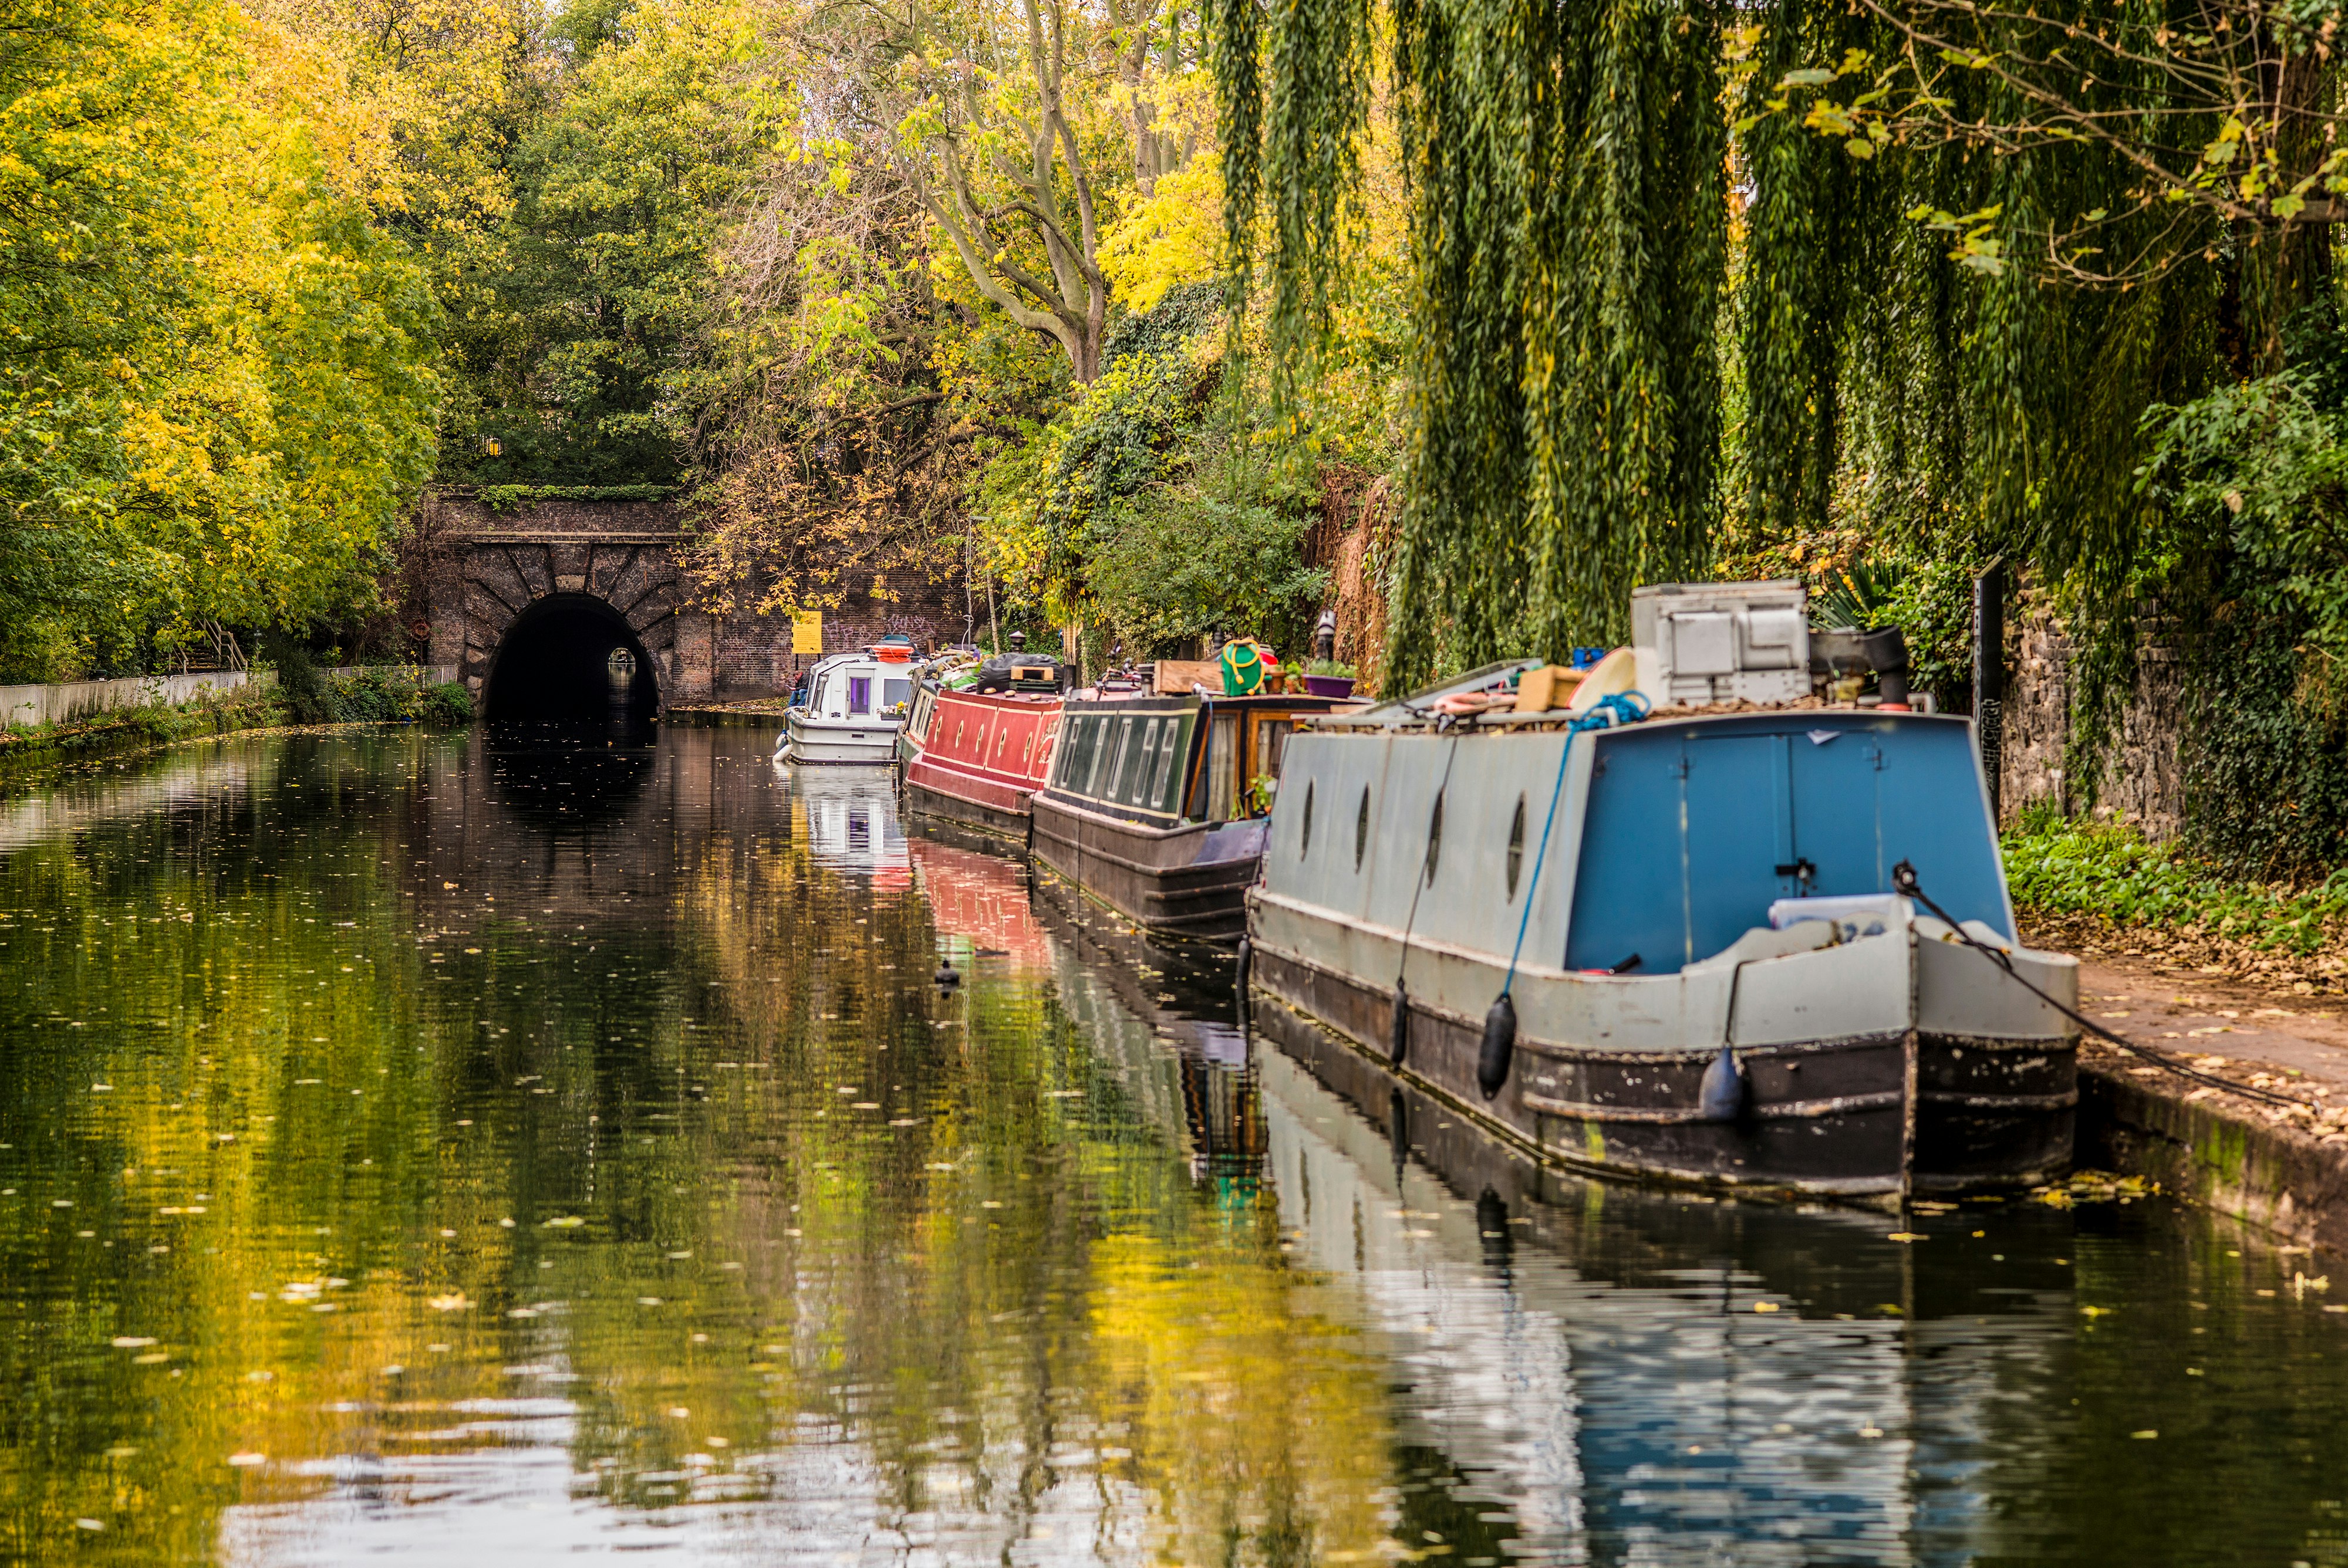 Canal boats docked alongside a narrow canal, with fall colors on the banks and a tunnel in the background